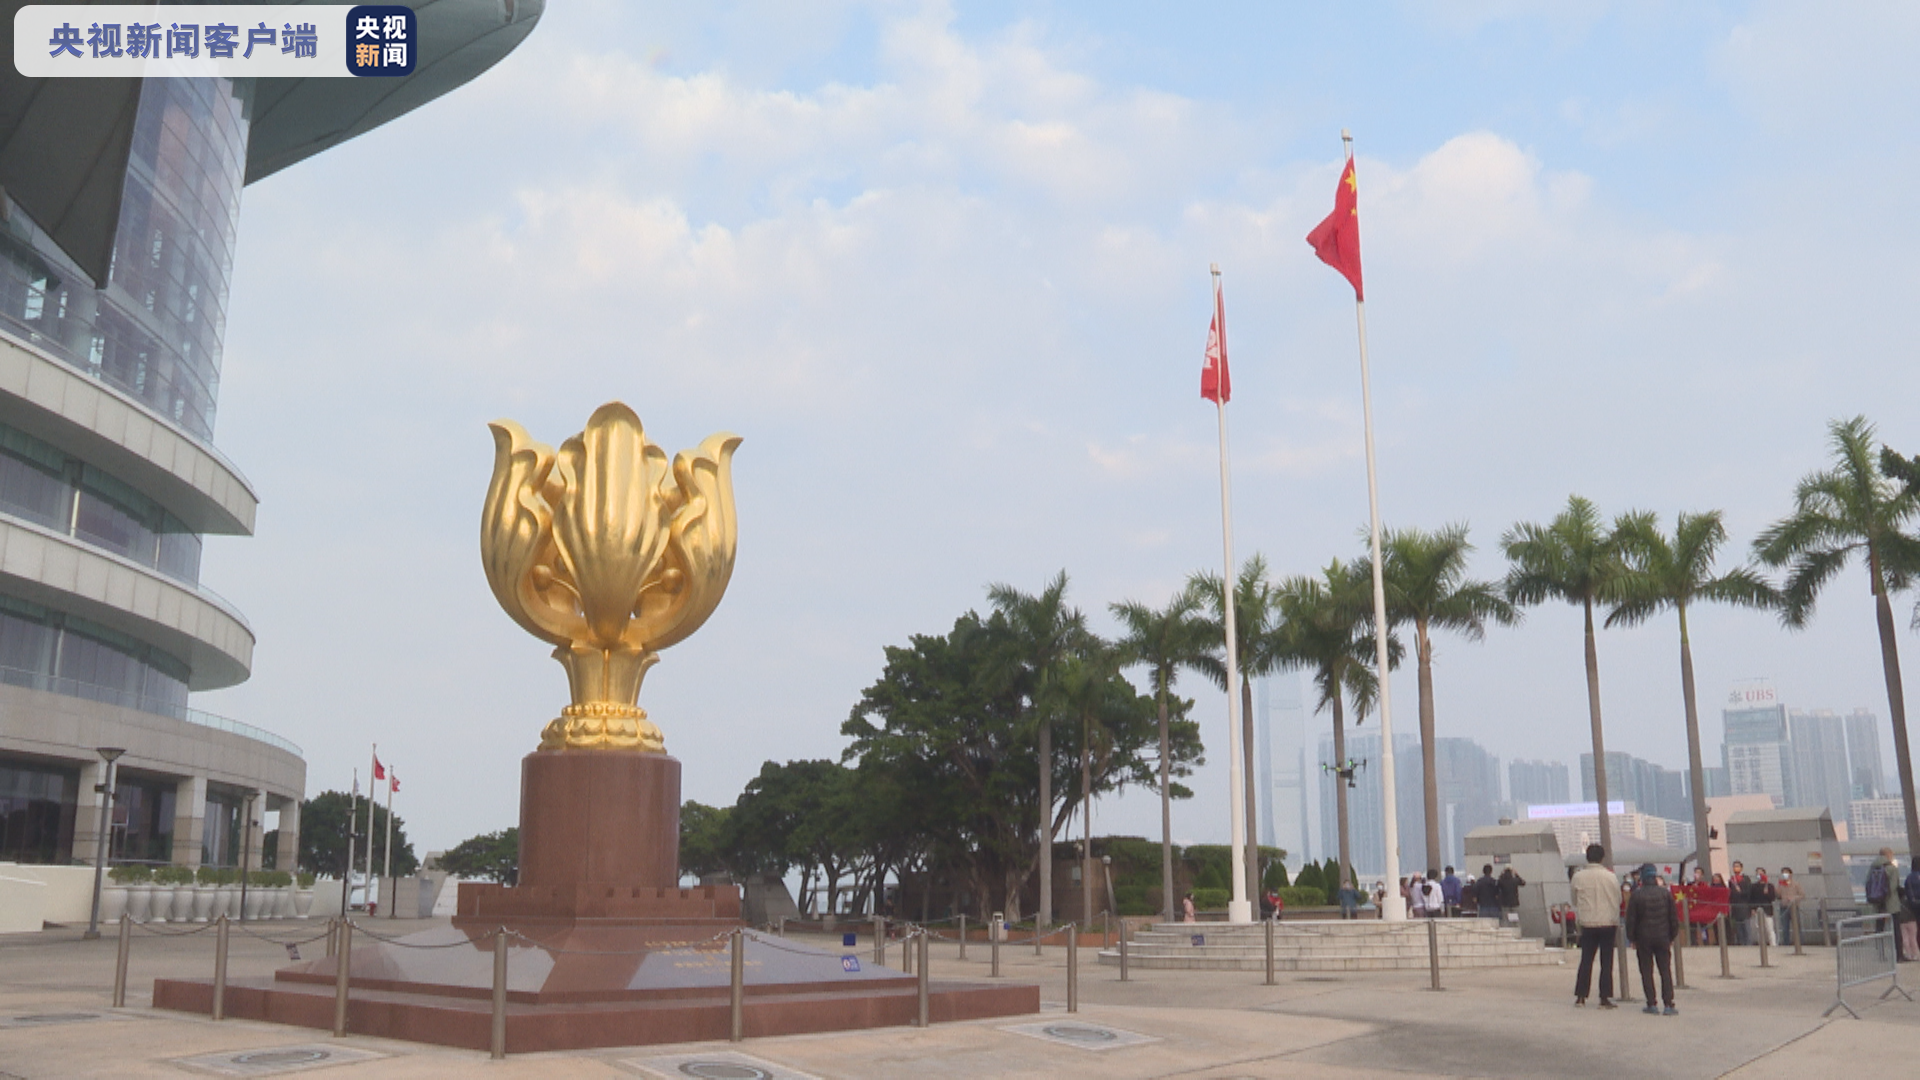 Hong Kong Golden Bauhinia Square held a New Year's flag raising ceremony